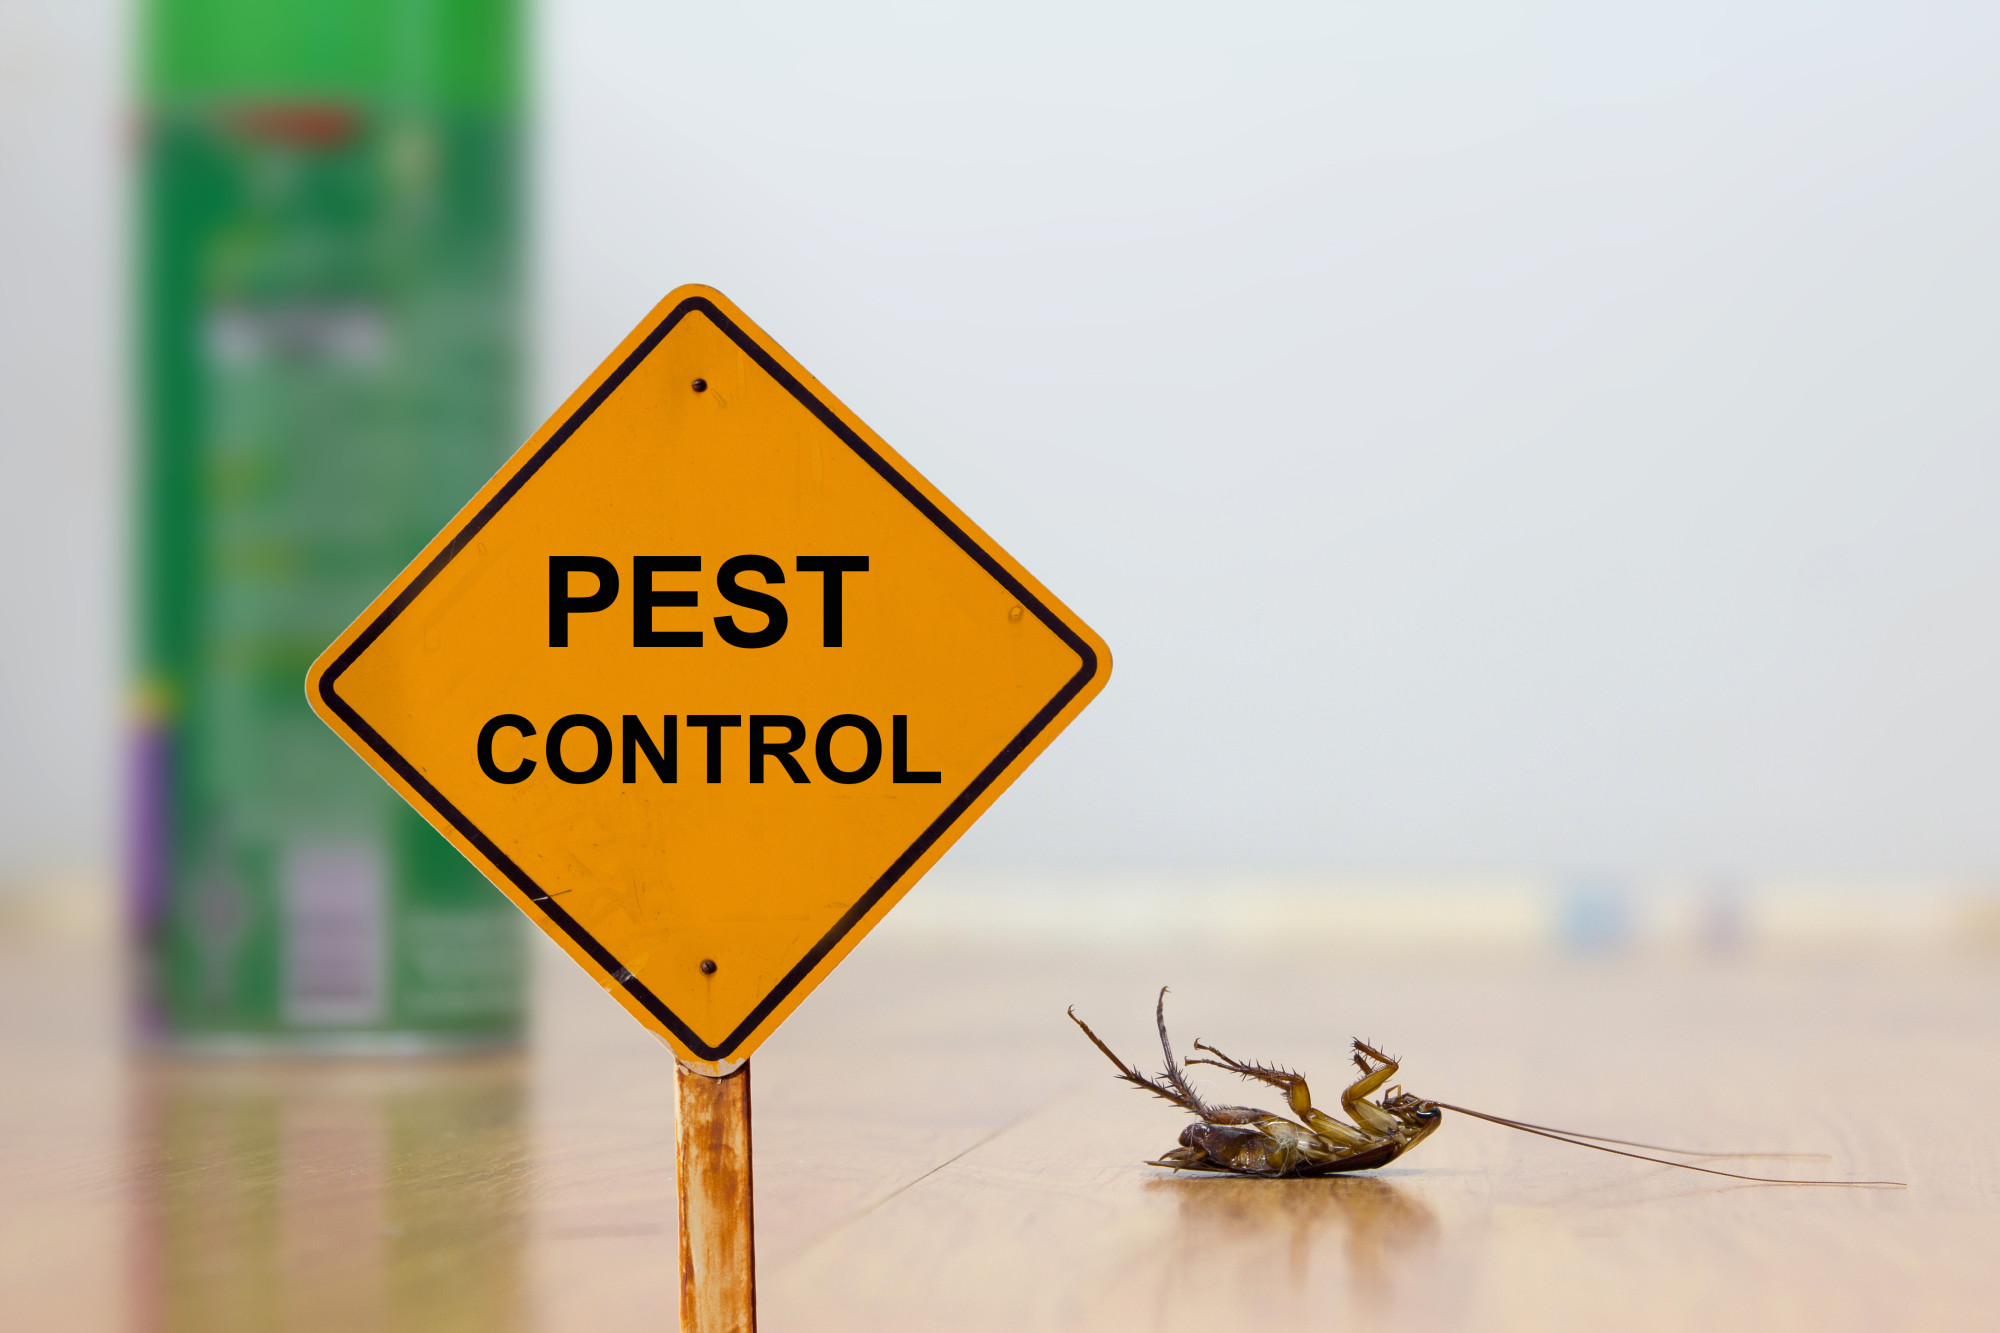 Sydney Pest Control Experts - Fast, Efficient, and Affordable